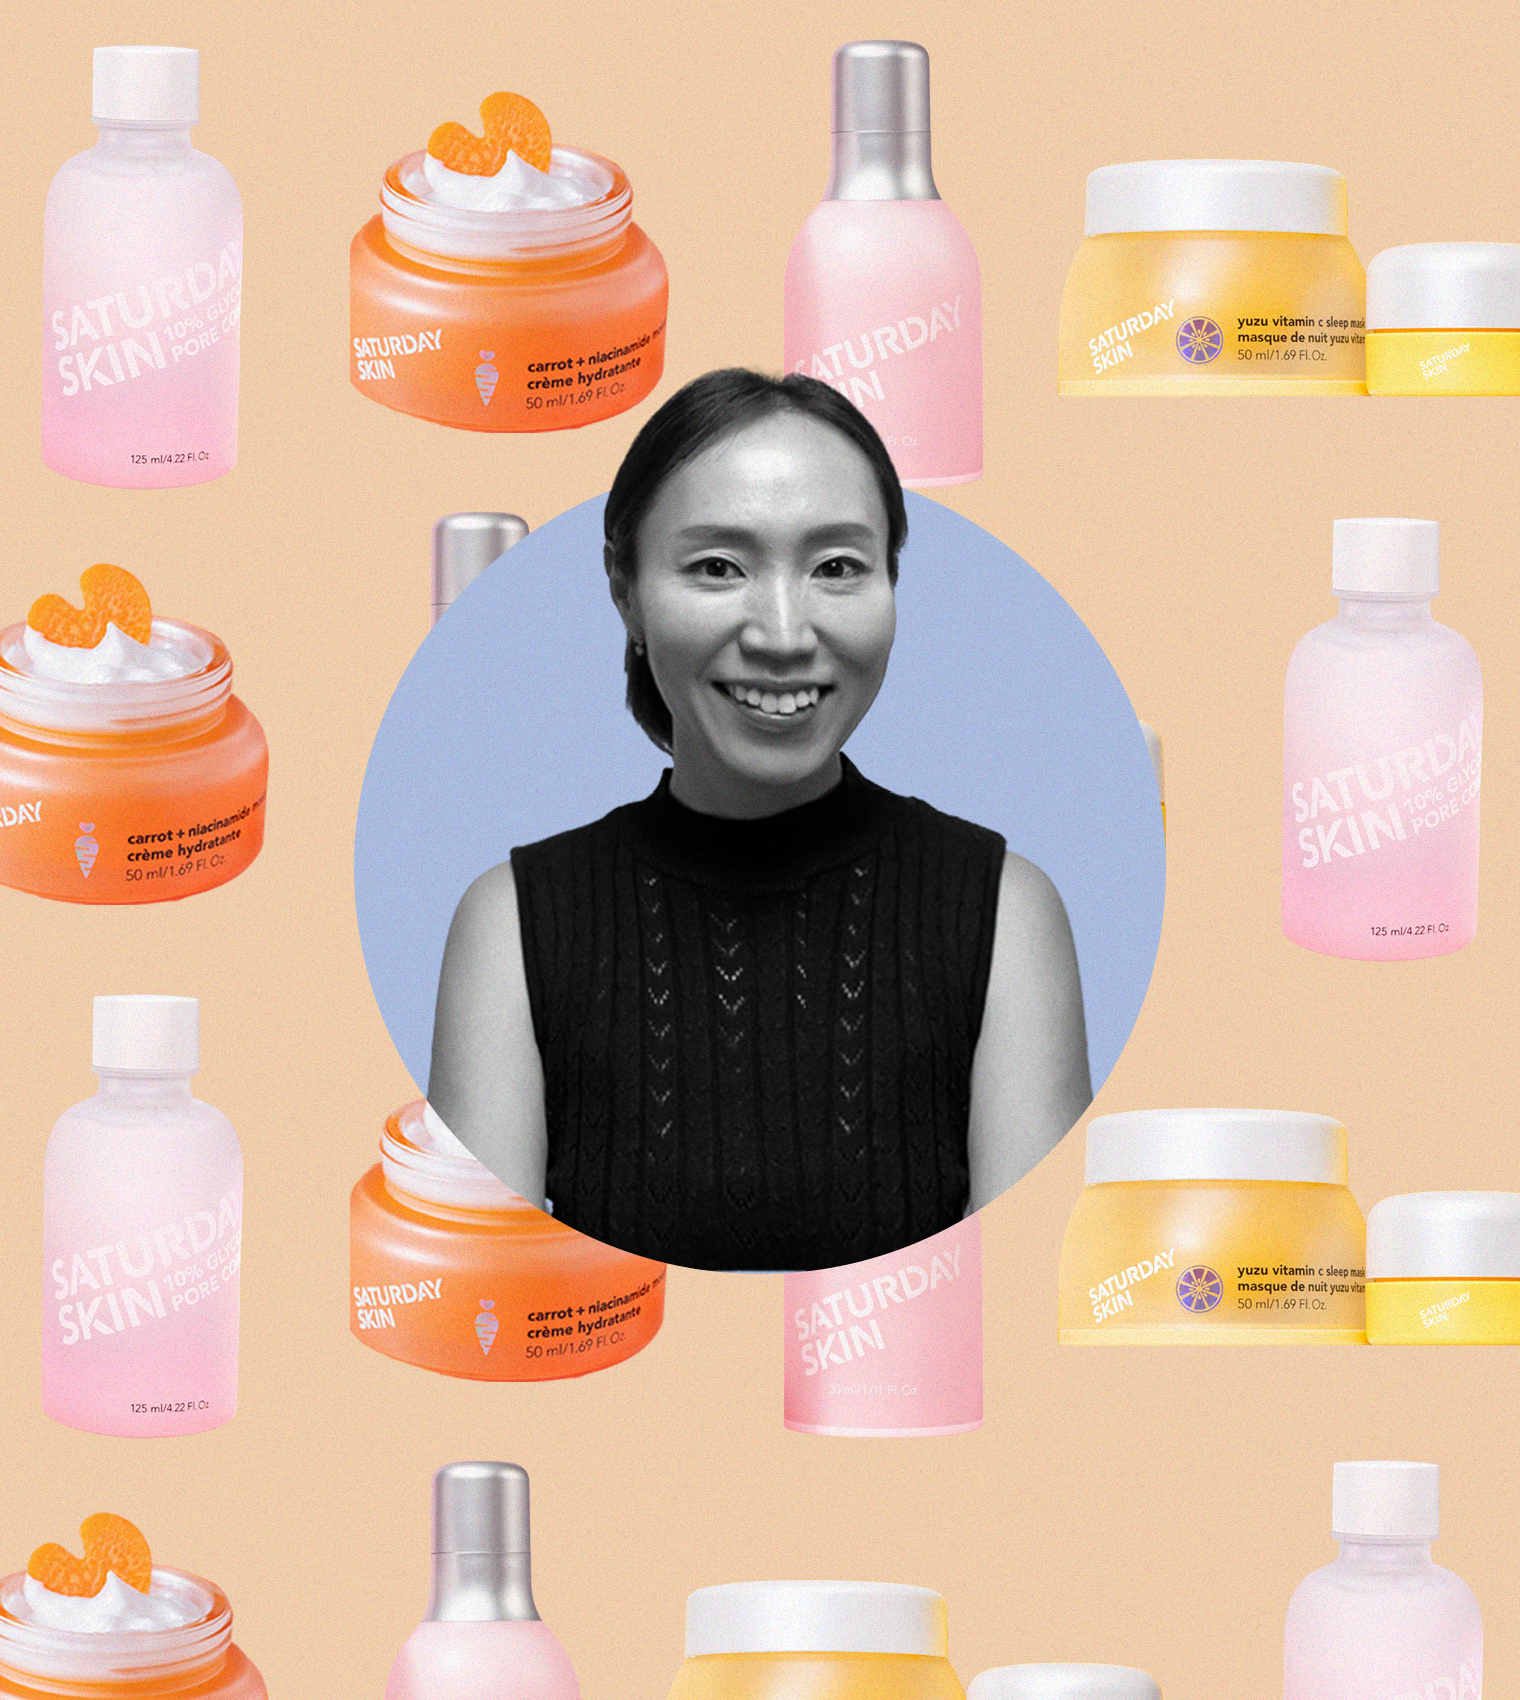 Saturday Skin’s Hyobin Song on “Intuitive Skincare” and How Beauty Starts From the Inside